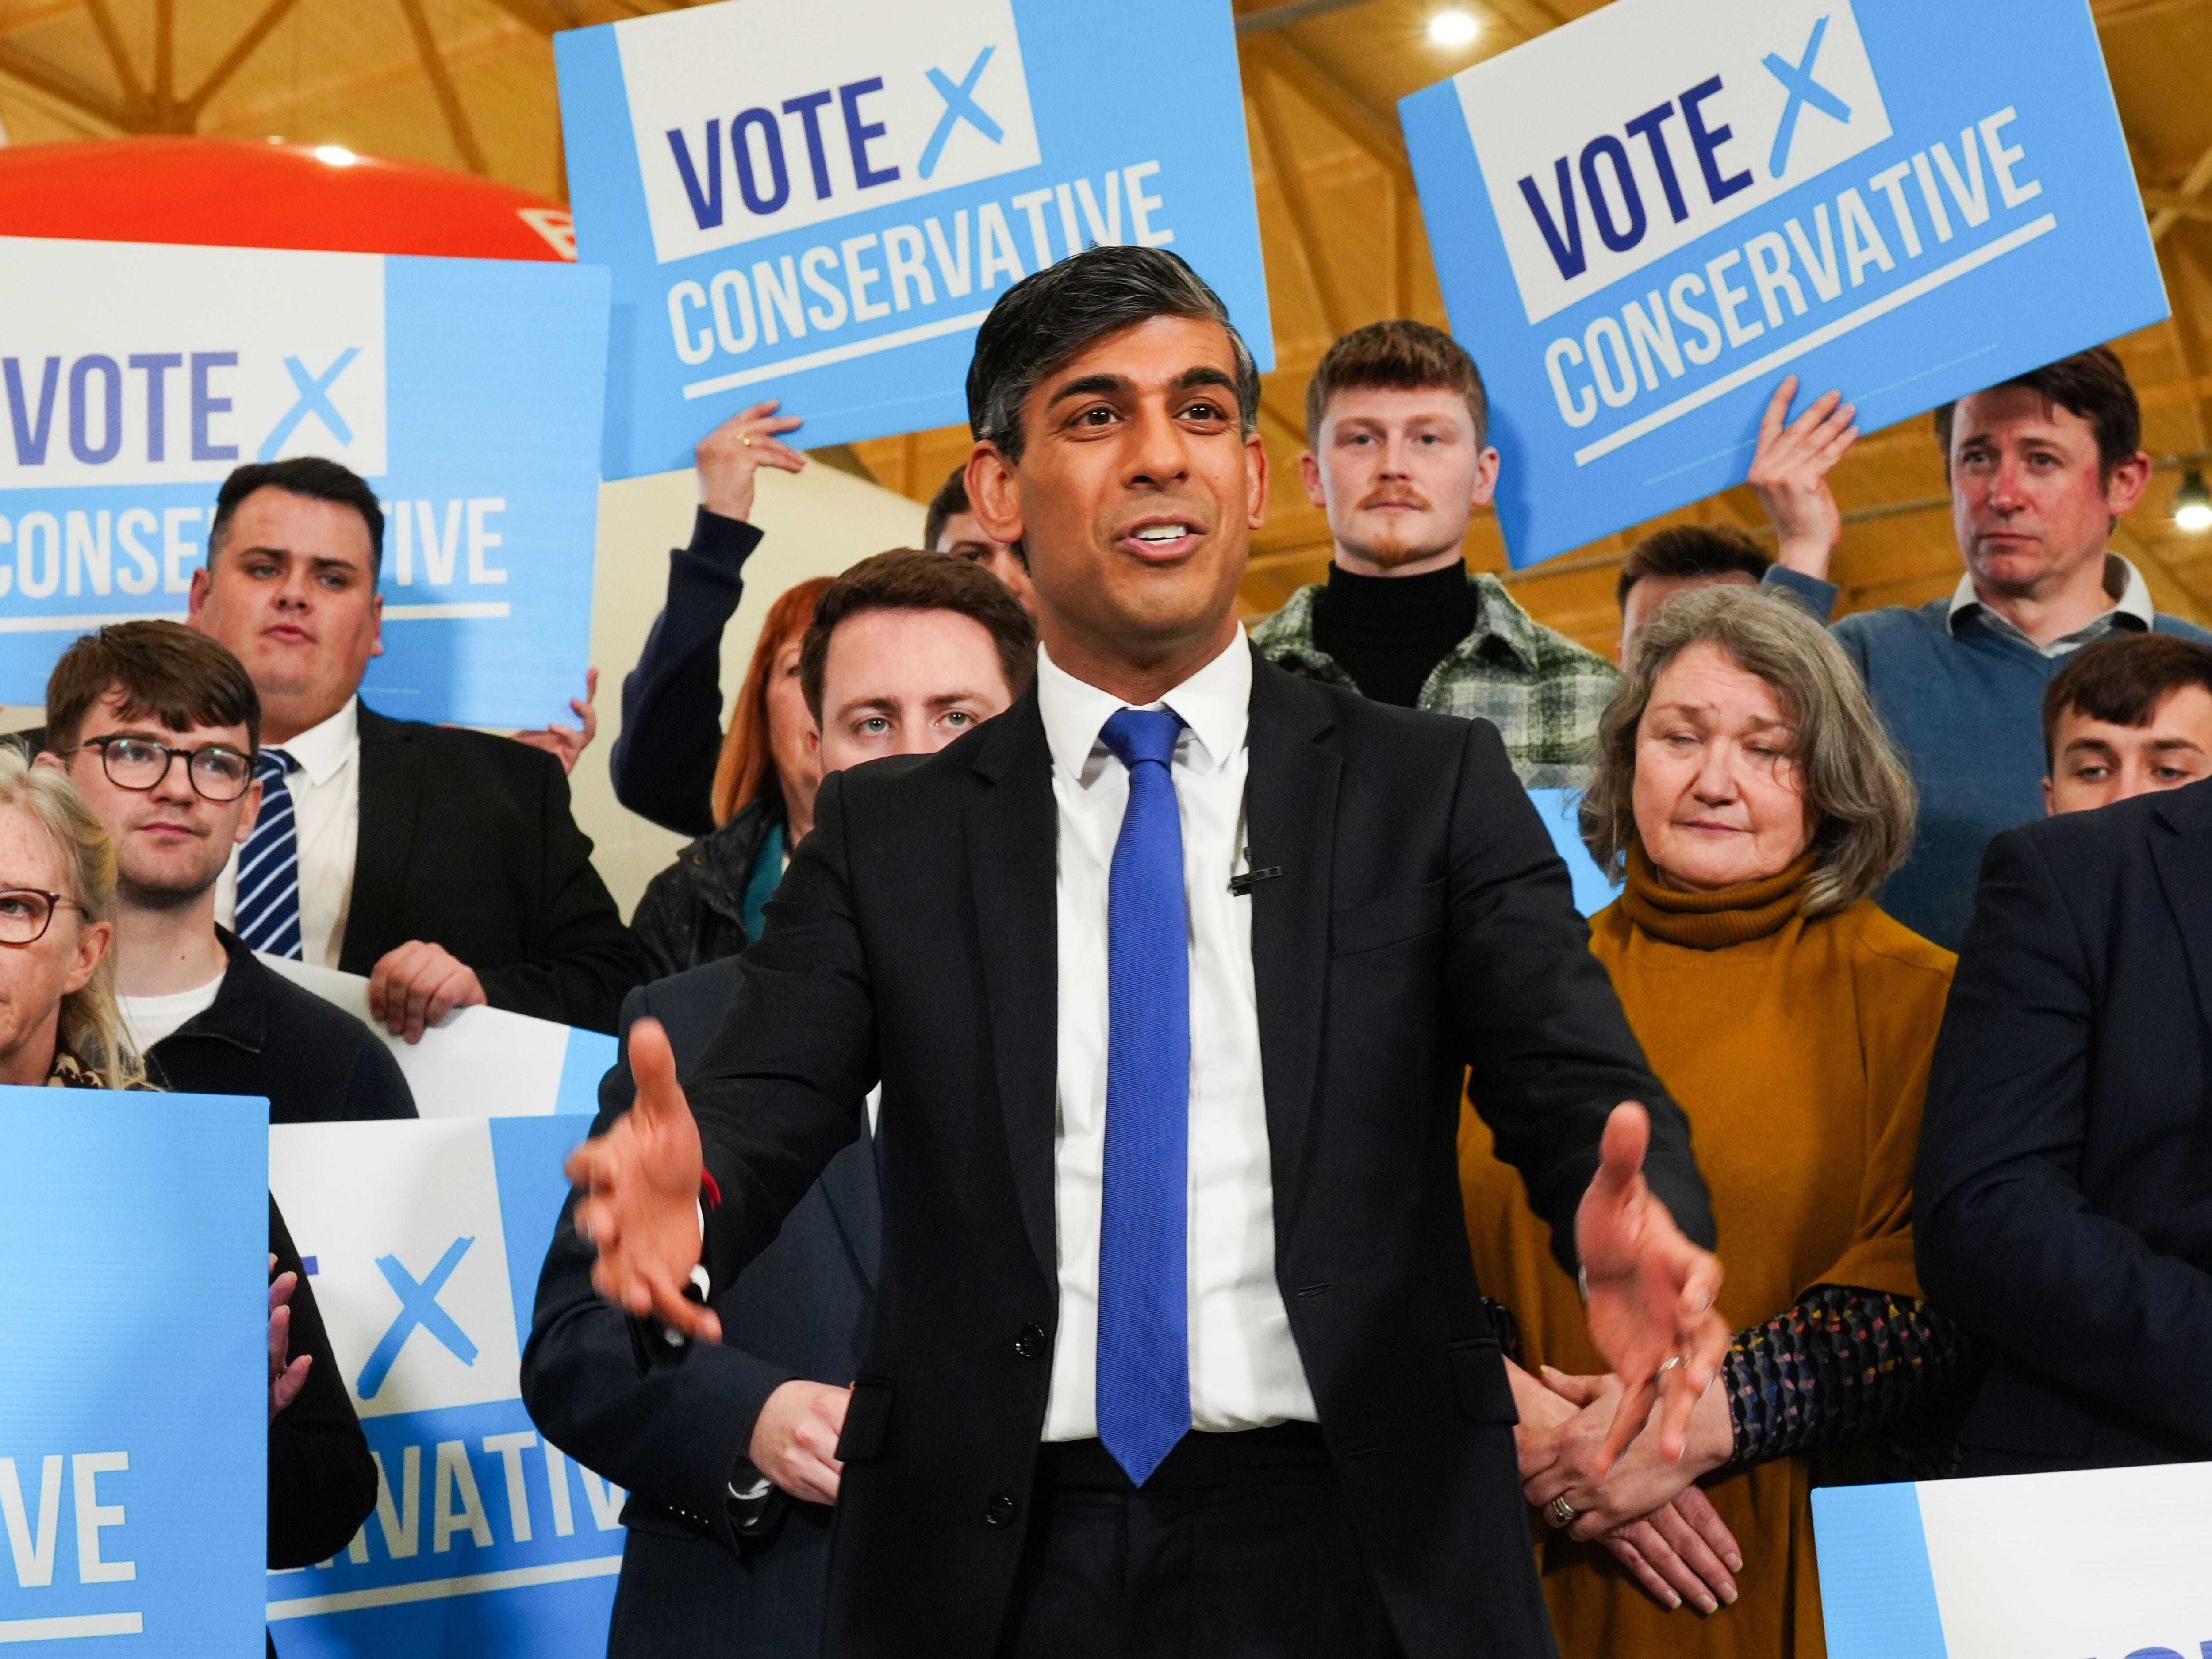 Tories may not win election, Sunak admits while claiming hung Parliament likely